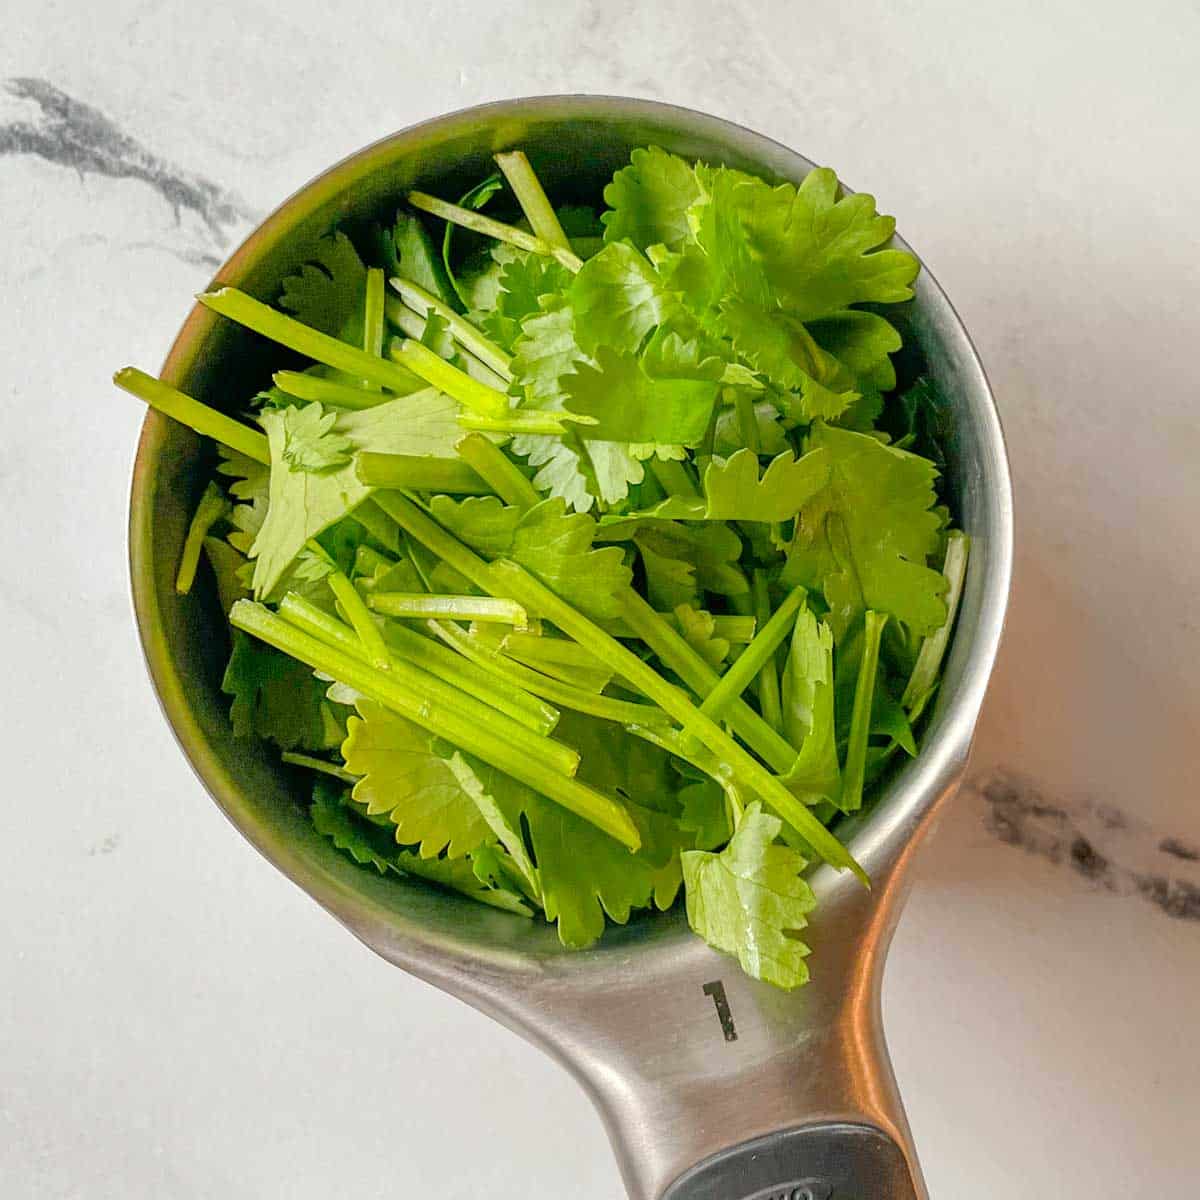 Chopped cilantro is shown in a measuring cup.